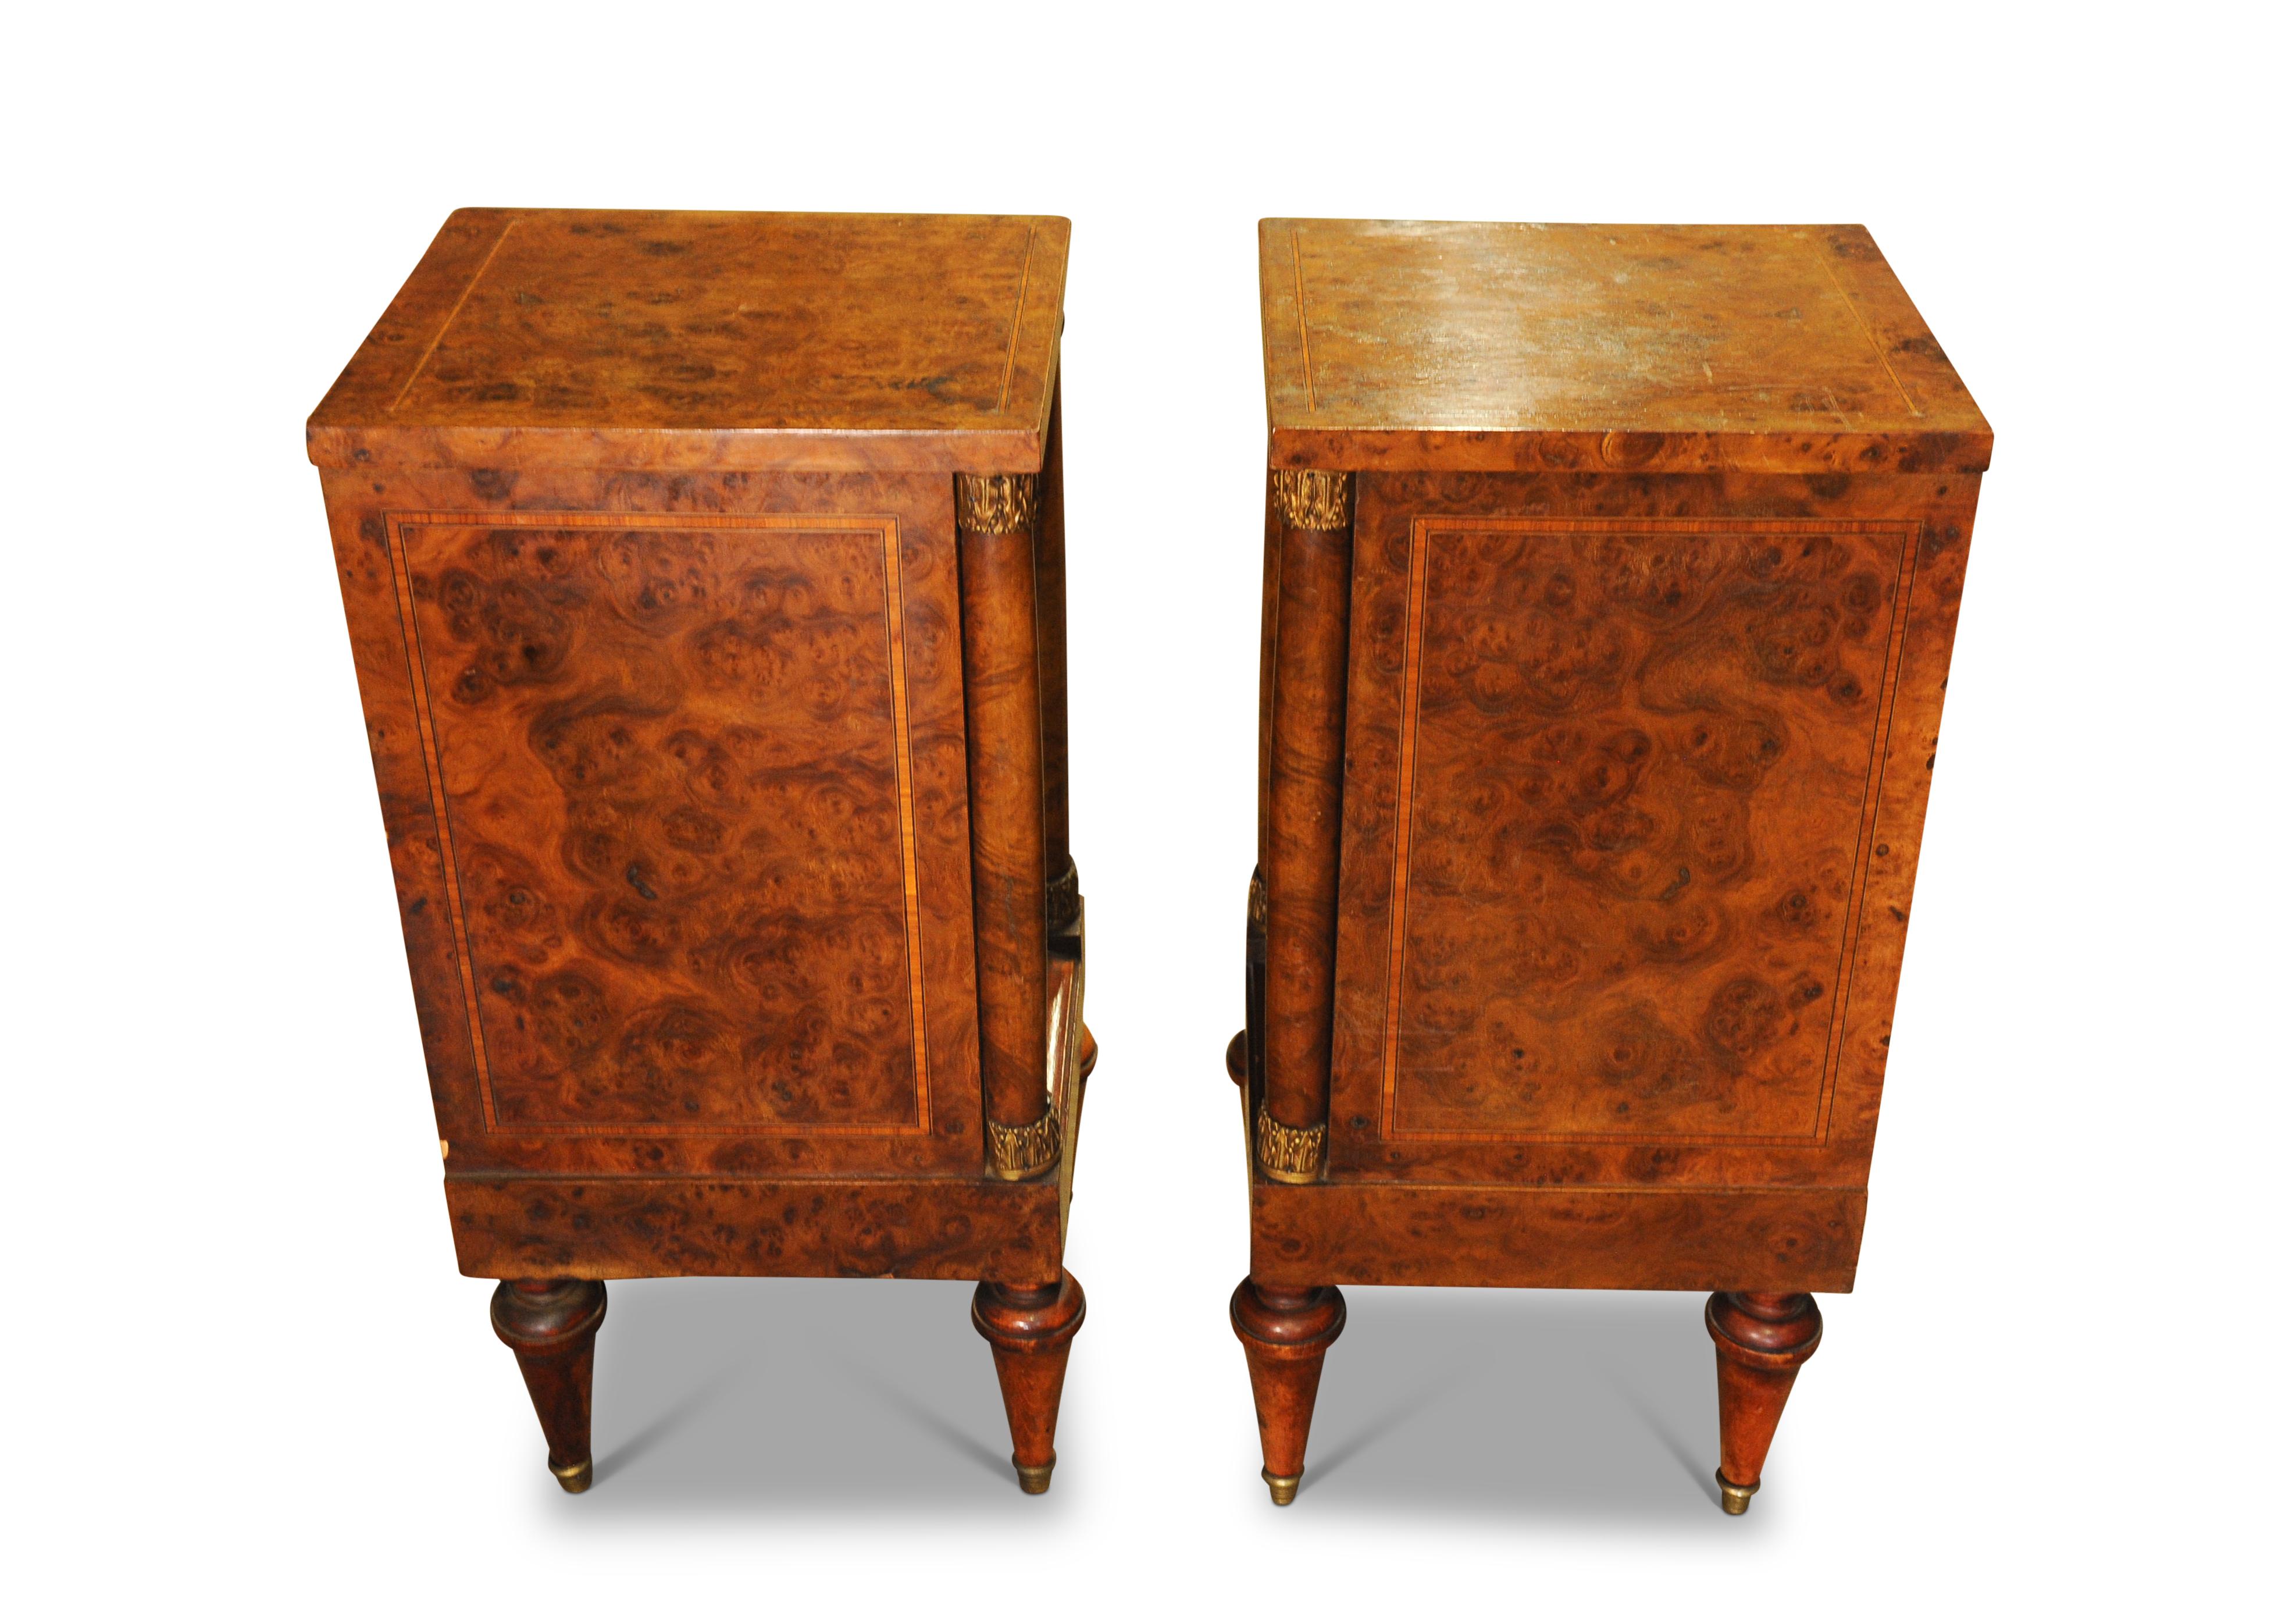 Exquisite Pair of French Empire Design Figured Walnut Three Drawer Nightstands For Sale 10